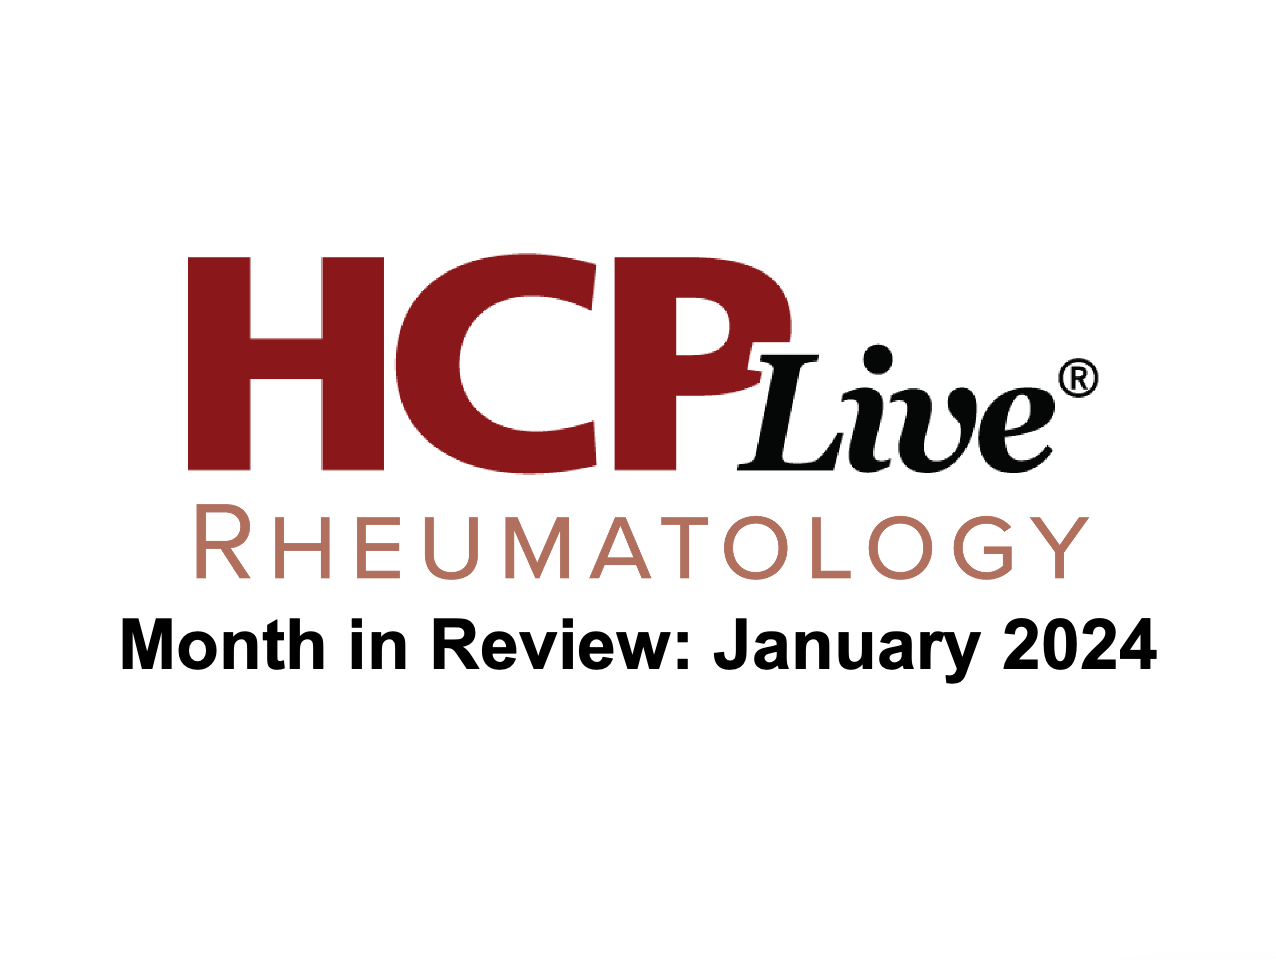 Rheumatology Month in Review: January 2024